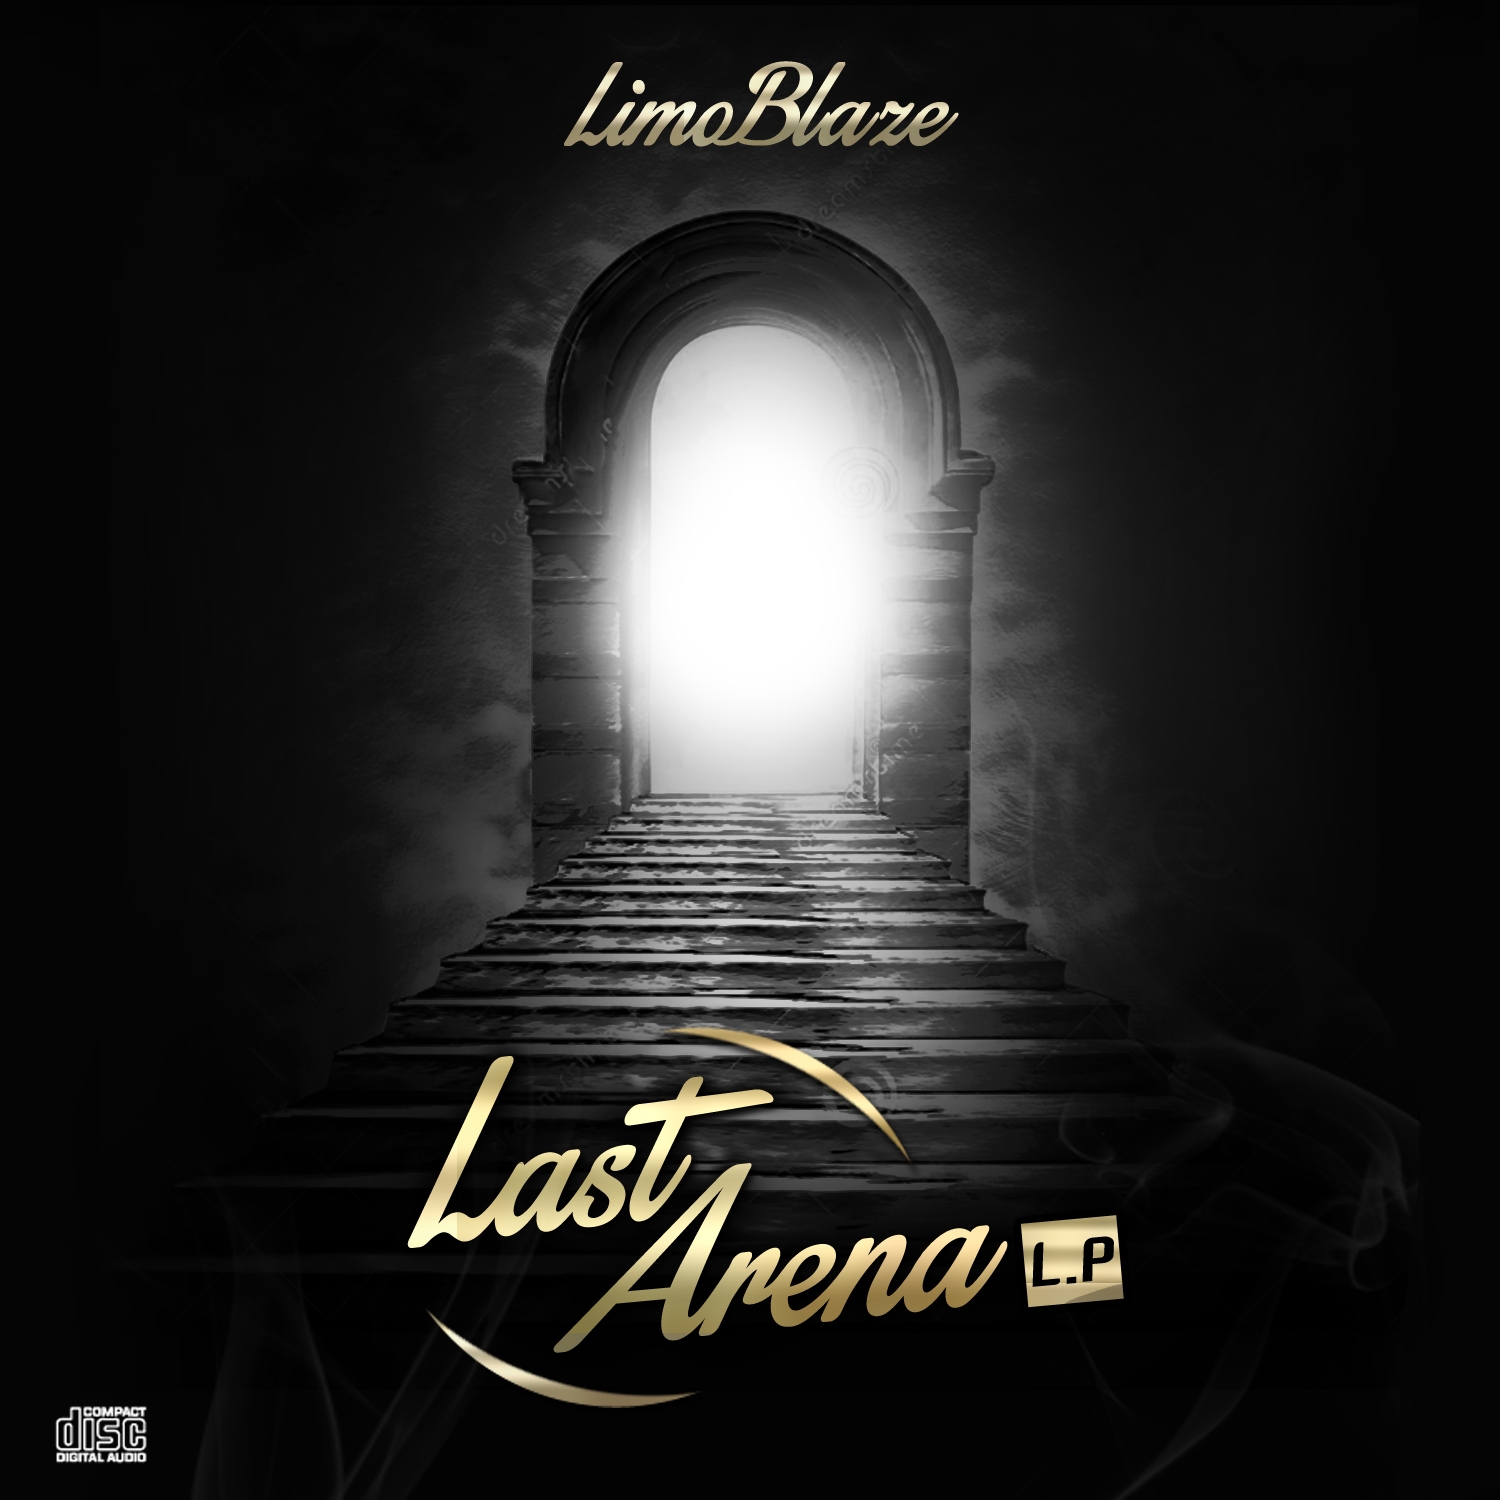 Limoblaze releases "Last Arena - LP " Cover art and track list, Set to be released 23rd July 2015 3